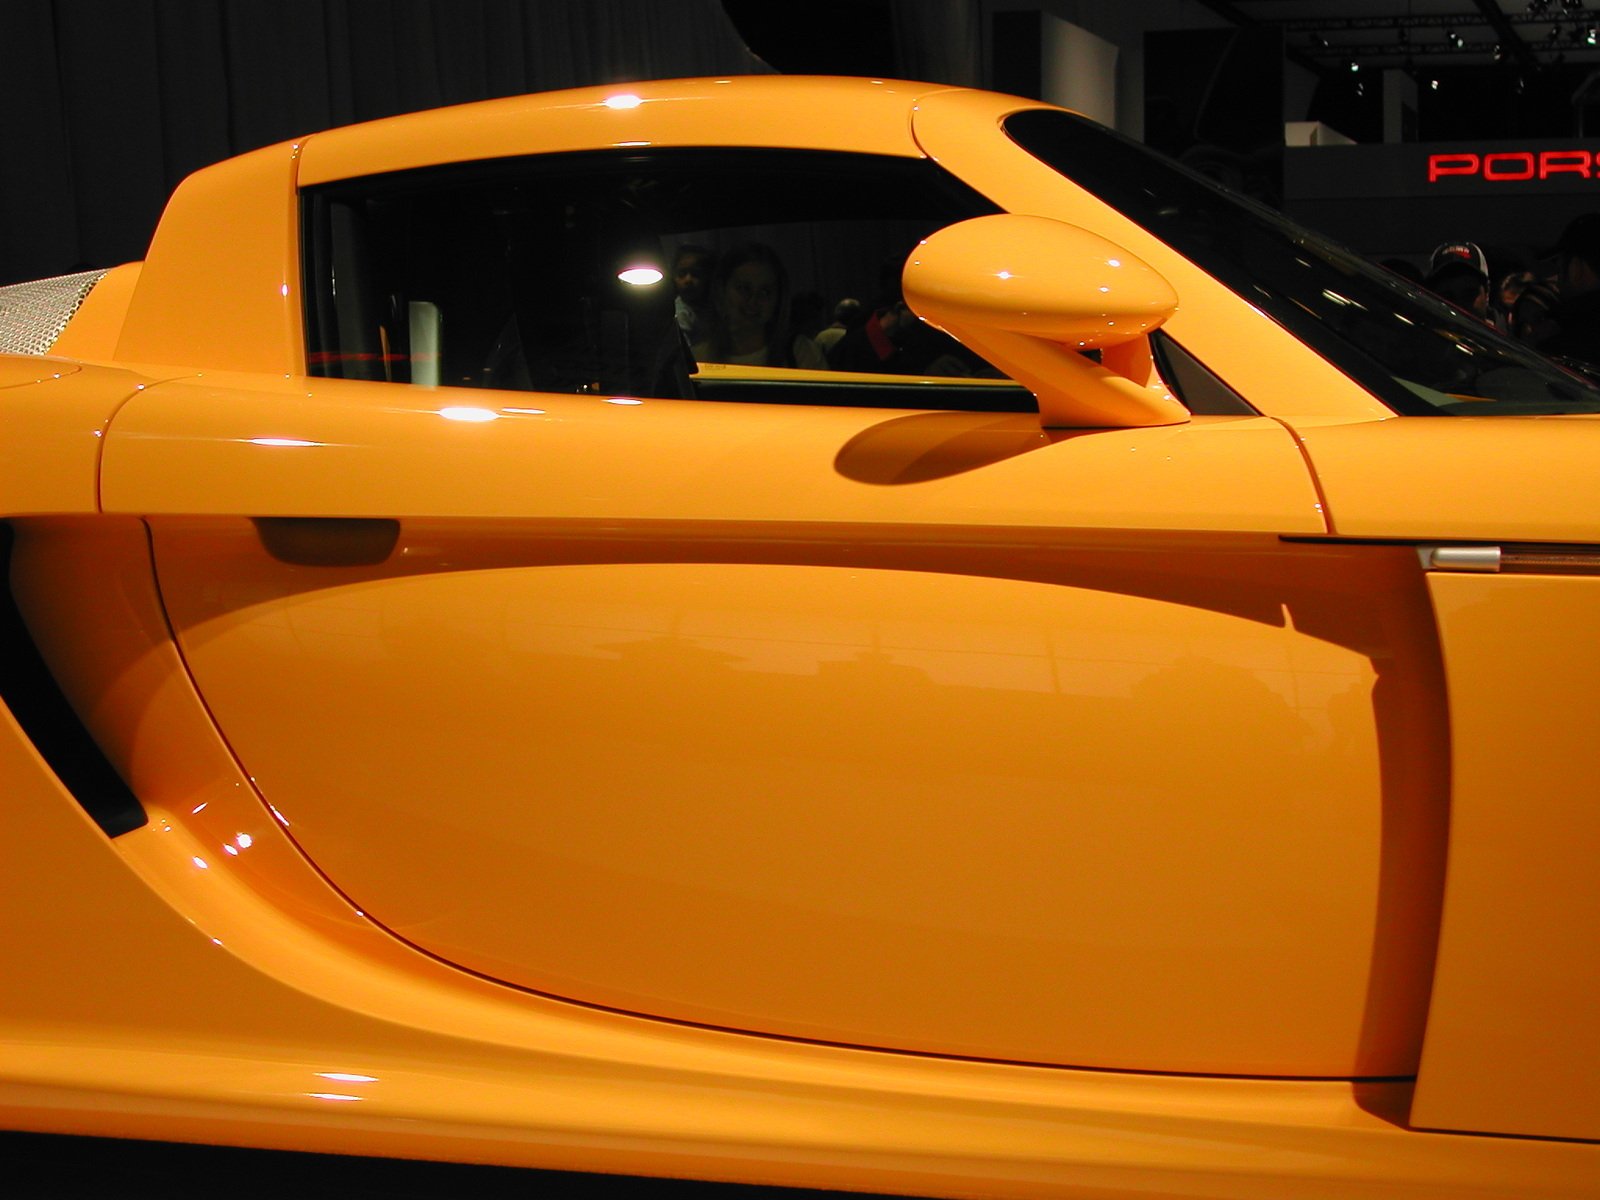 a yellow sports car is on display at a convention